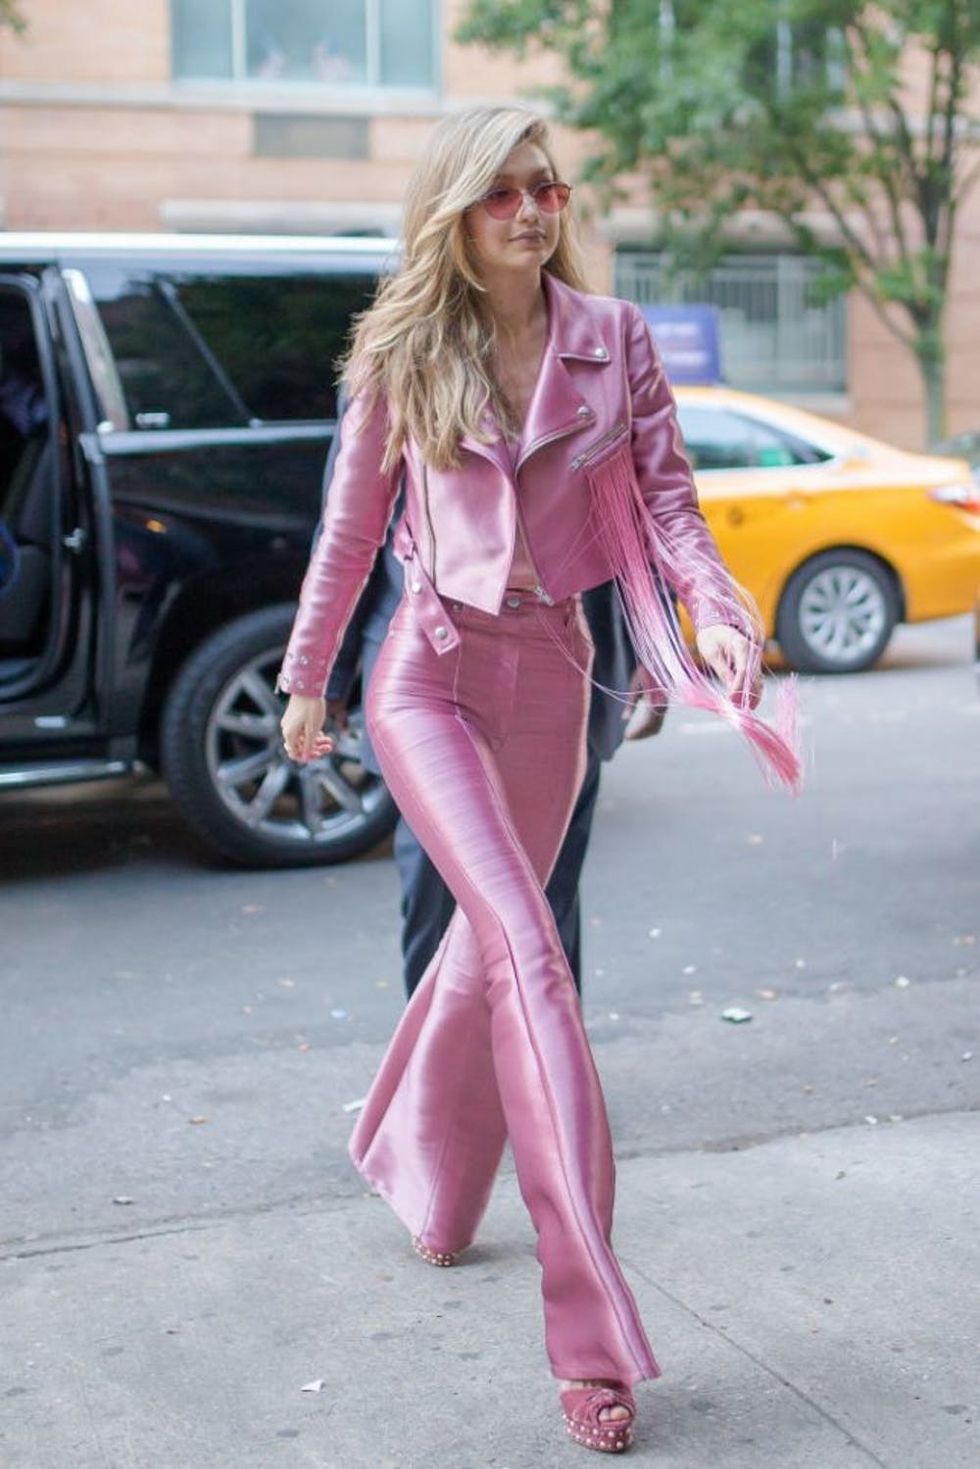 NEW YORK, NY - JUNE 27: Gigi Hadid is seen on June 27, 2017 in New York City. (Photo by Tal Rubin/GC Images)